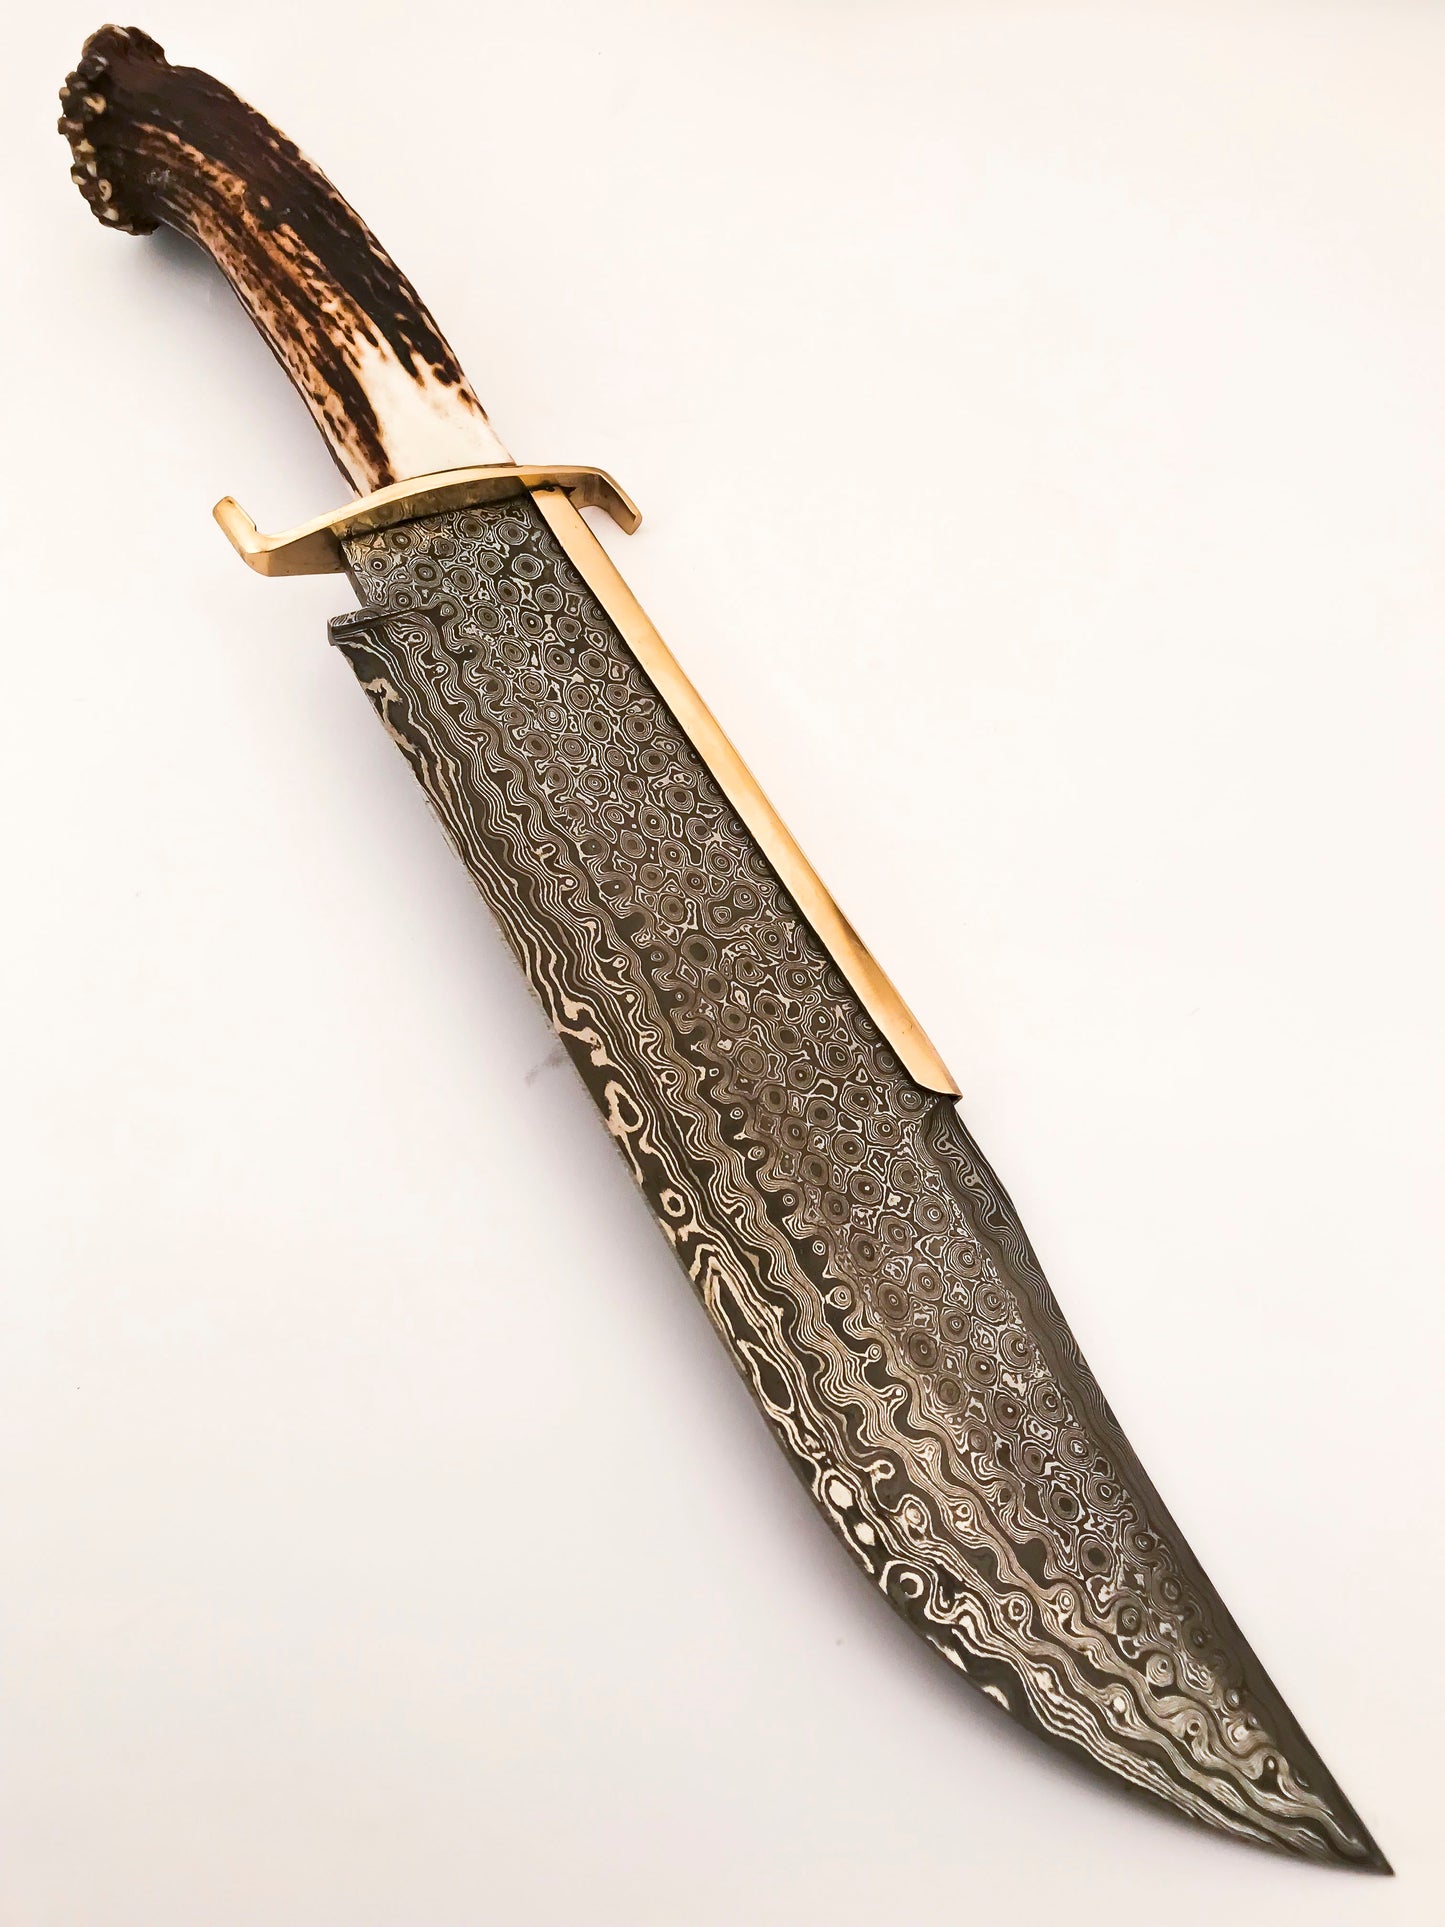 Damascus Steel Bowie knife with Stag Horn handle